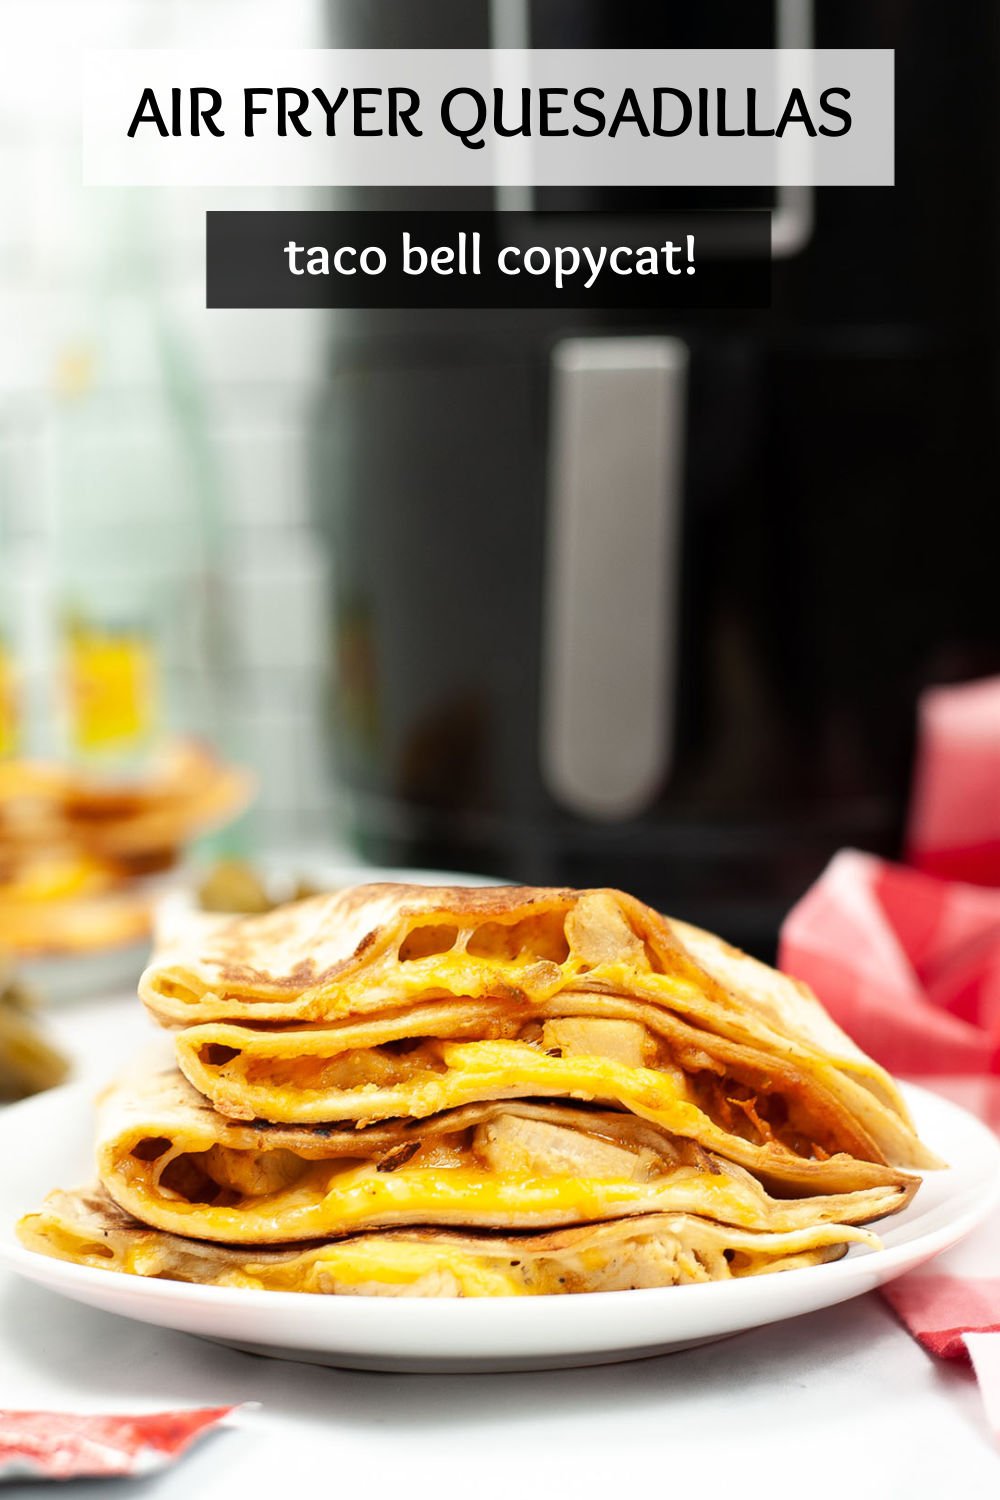 This air fryer quesadilla filled with chicken and copycat Taco Bell quesadilla sauce is a quick and easy dinner idea. Making them in the air fryer leaves the tortilla perfectly crisp and the cheese nice and melty. | www.persnicketyplates.com